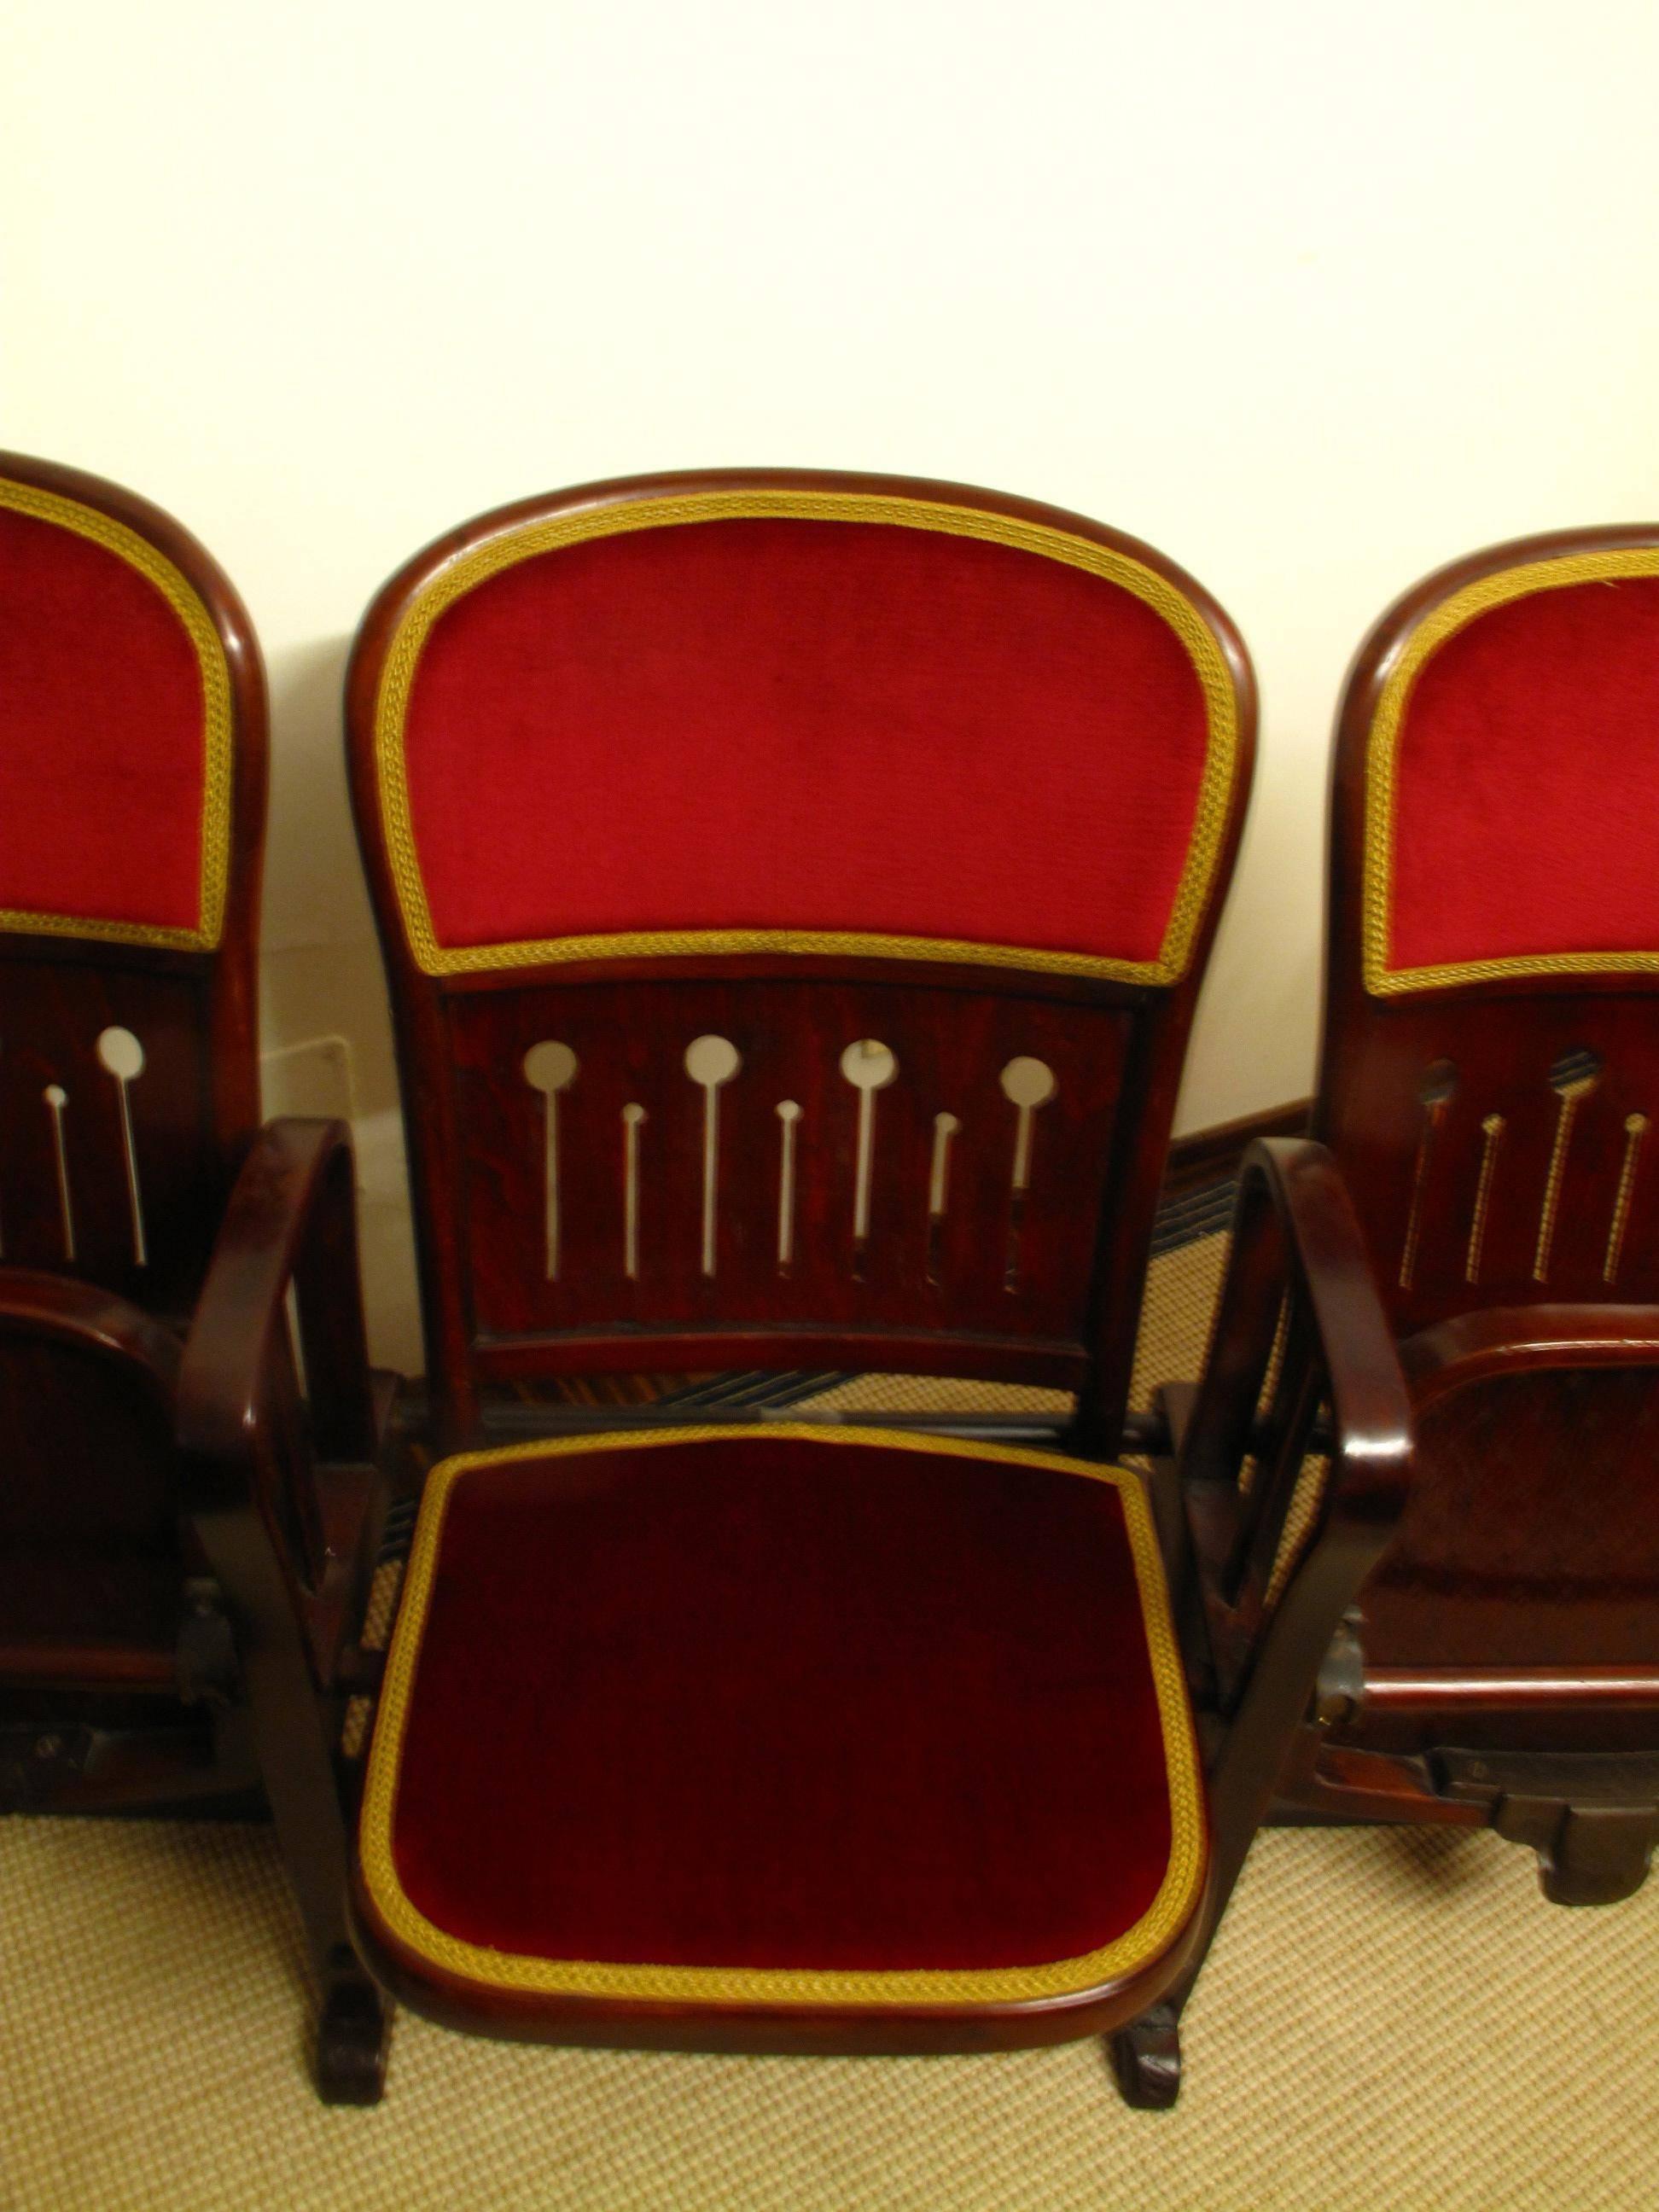 Original set of four connected bentwood theatre chairs by Thonet, circa 1907. Each chair folds up and down, has velvet-covered padding to the seat and back, as well as decorative piercing to seat lower back.